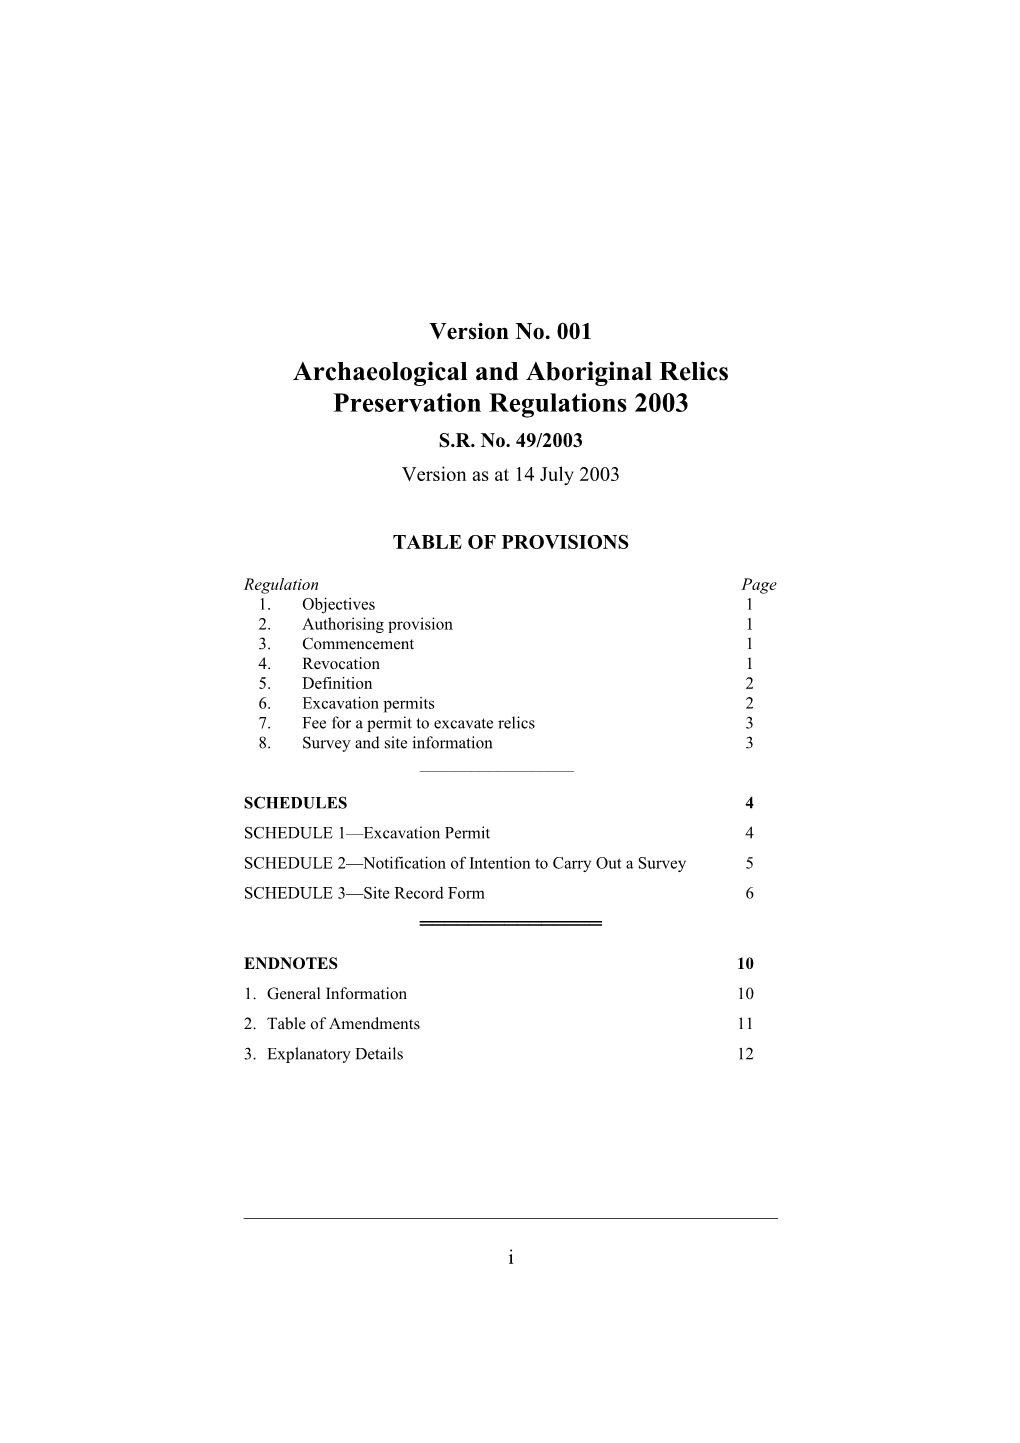 Archaeological and Aboriginal Relics Preservation Regulations 2003